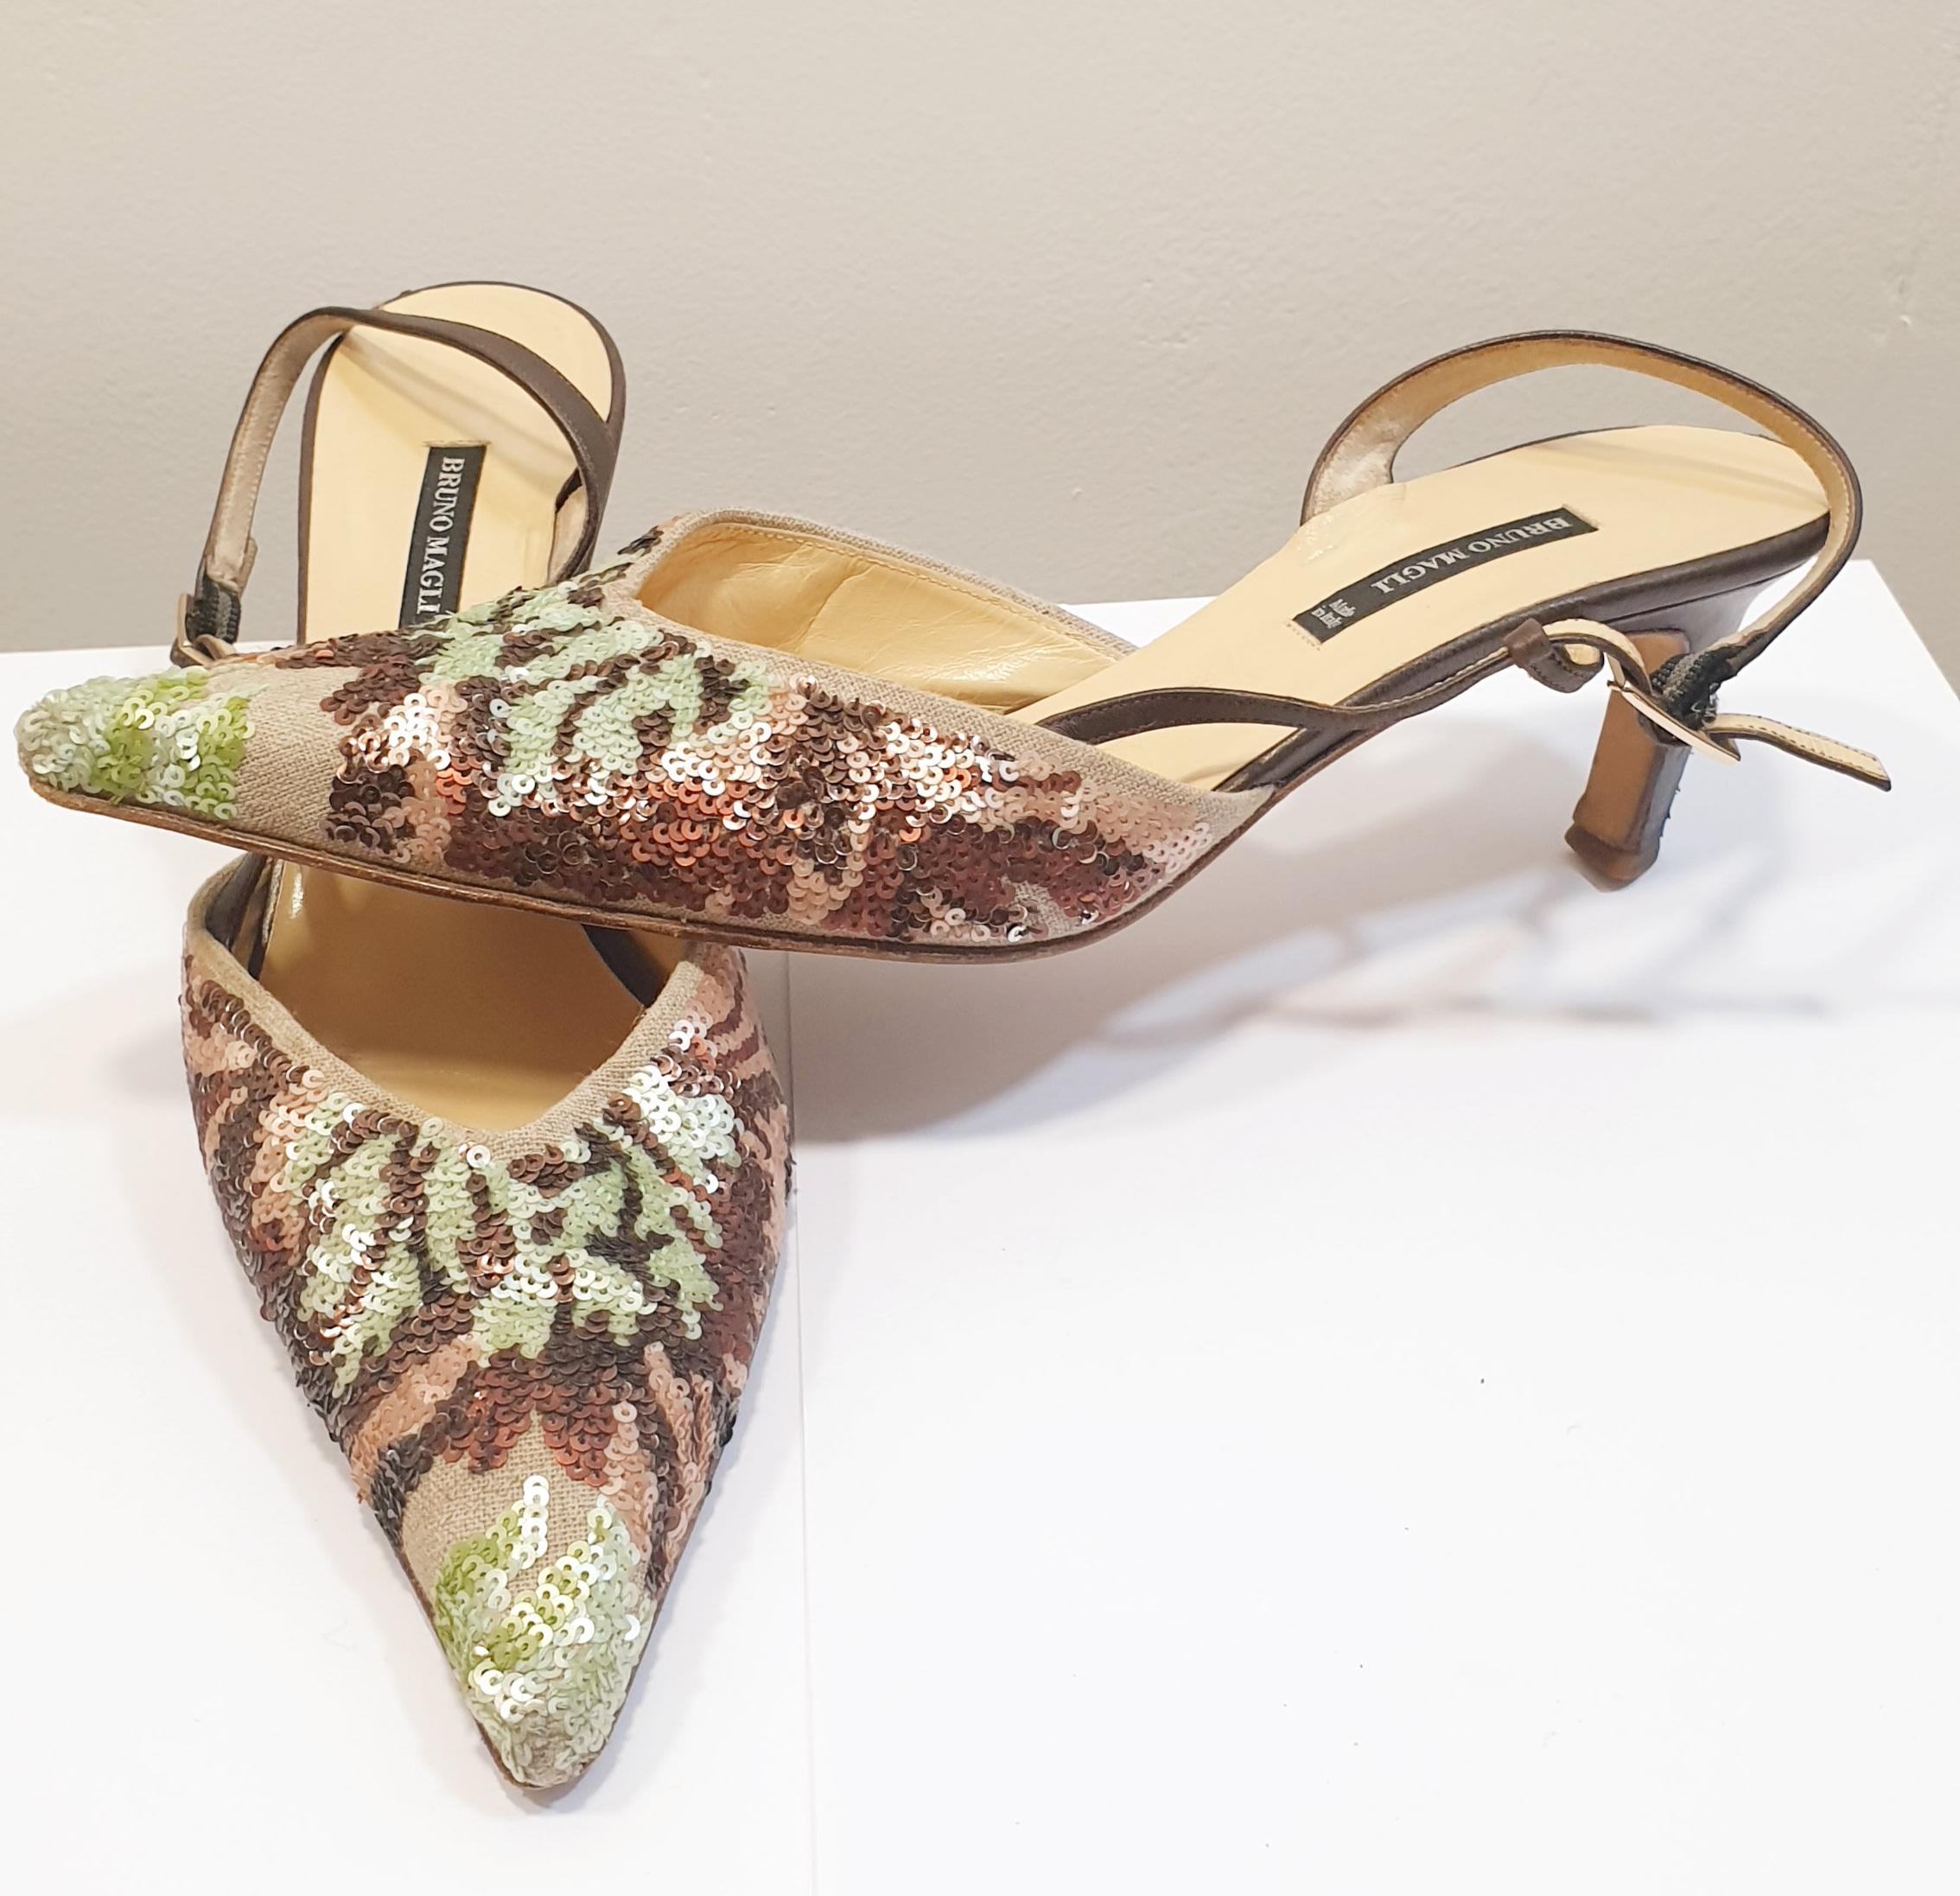 Beige heeled sandals with sequins by Bruno Magli and brown leather peep toe 
Bruno Magli has been producing quality Italian leather goods since 1936. 
These ultra feminine peep toe pumps are a beautiful combination of jade green, blue and plum